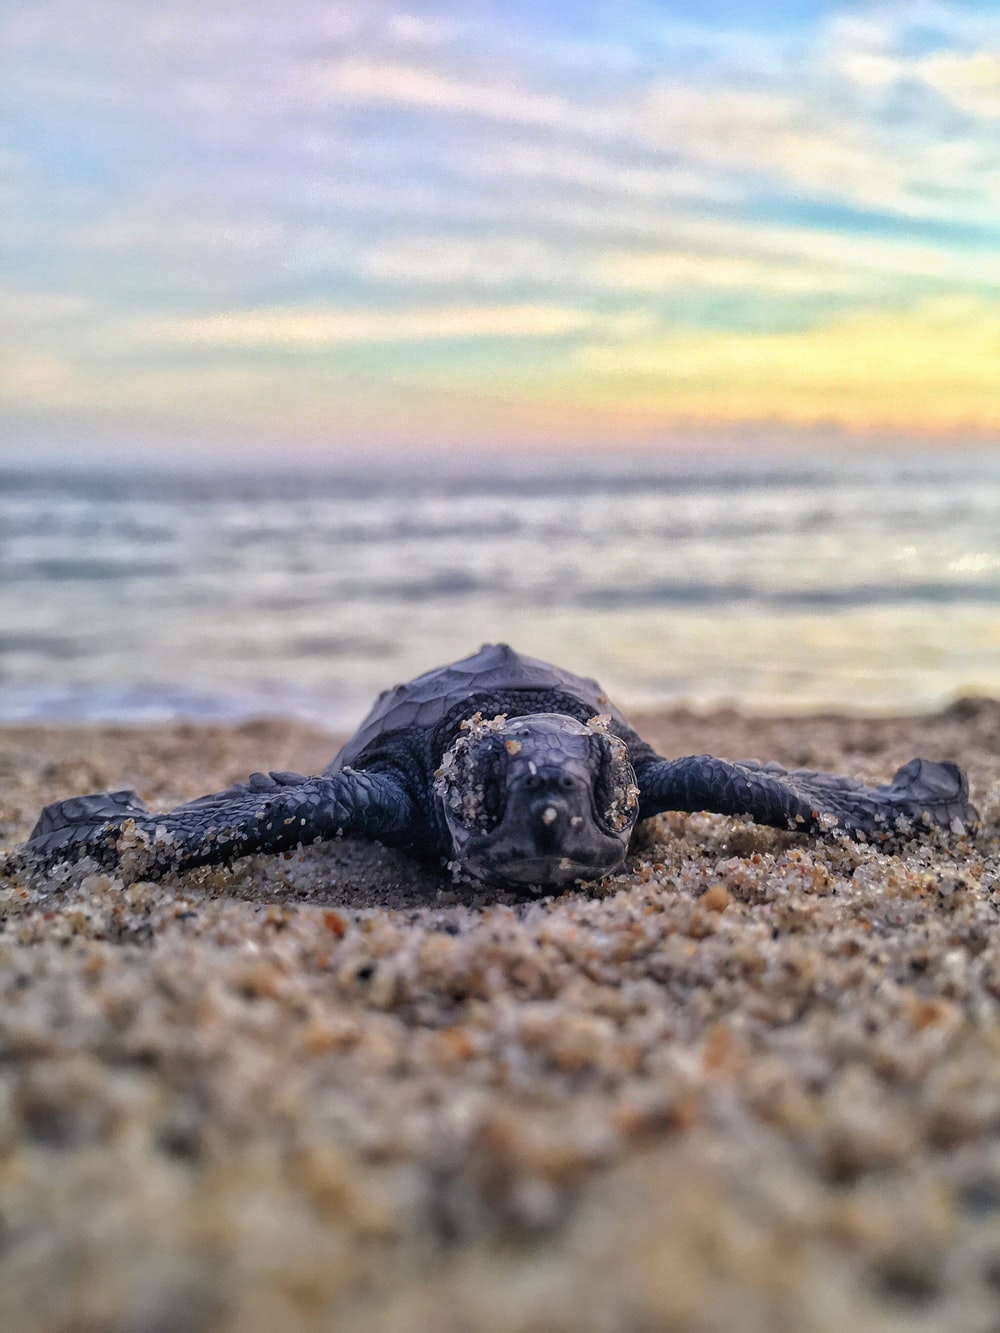 Baby Sea Turtle Pictures HD Image